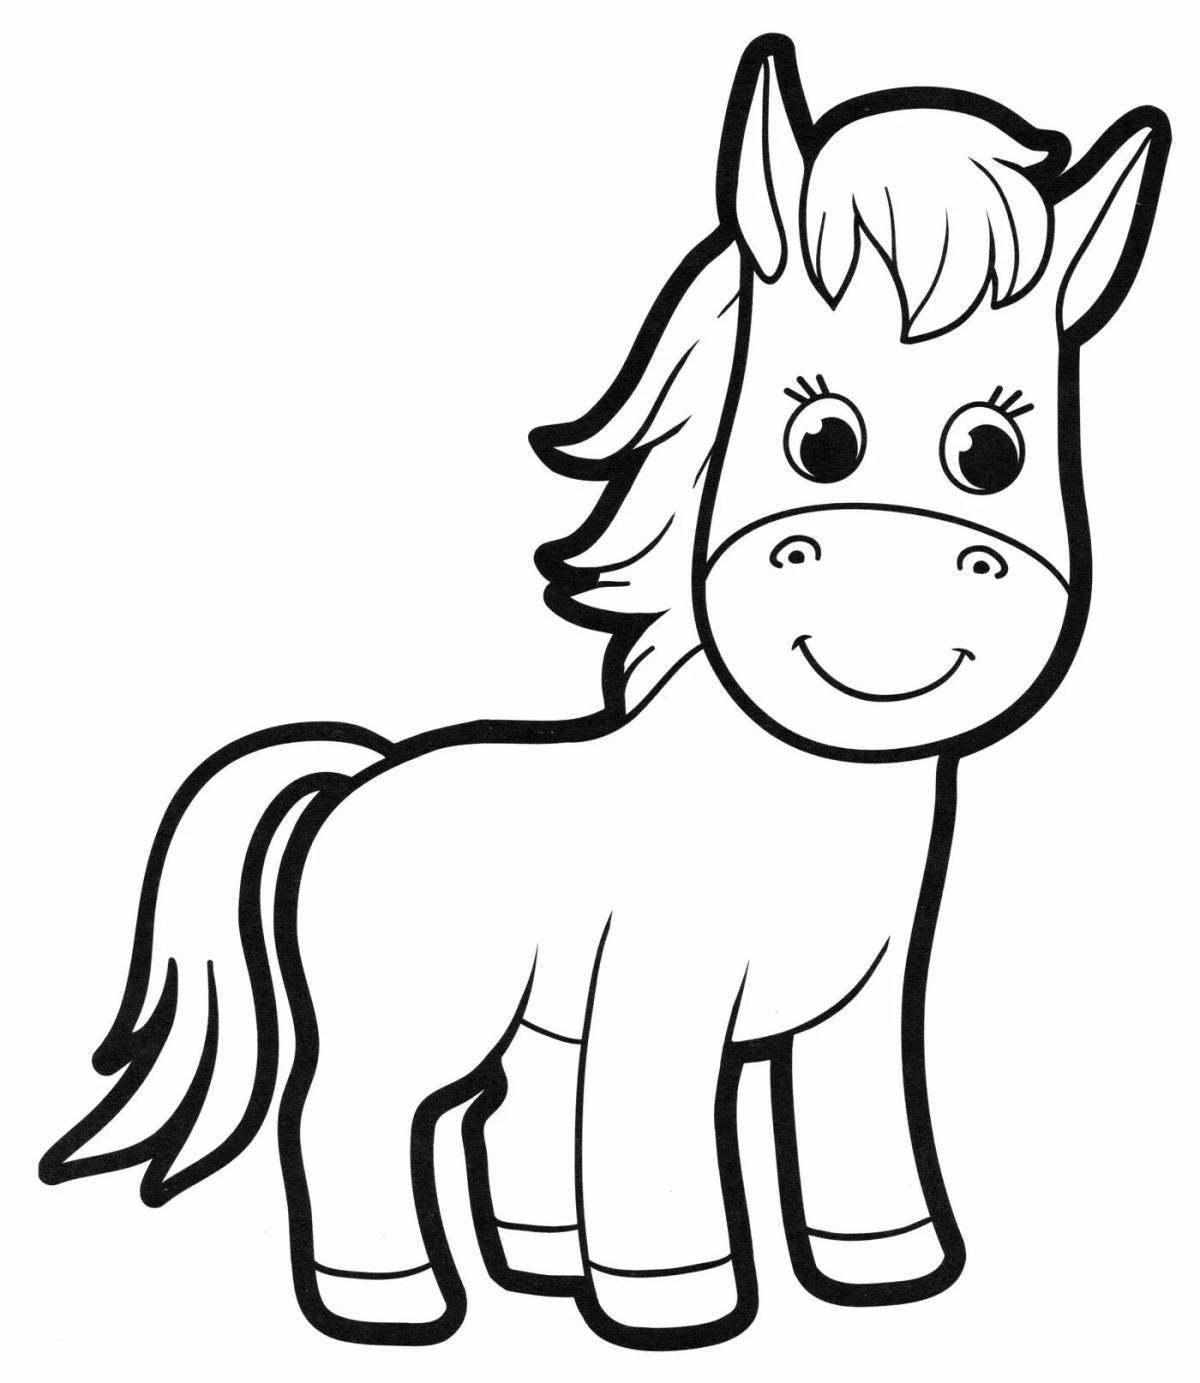 Fun horse drawing for kids